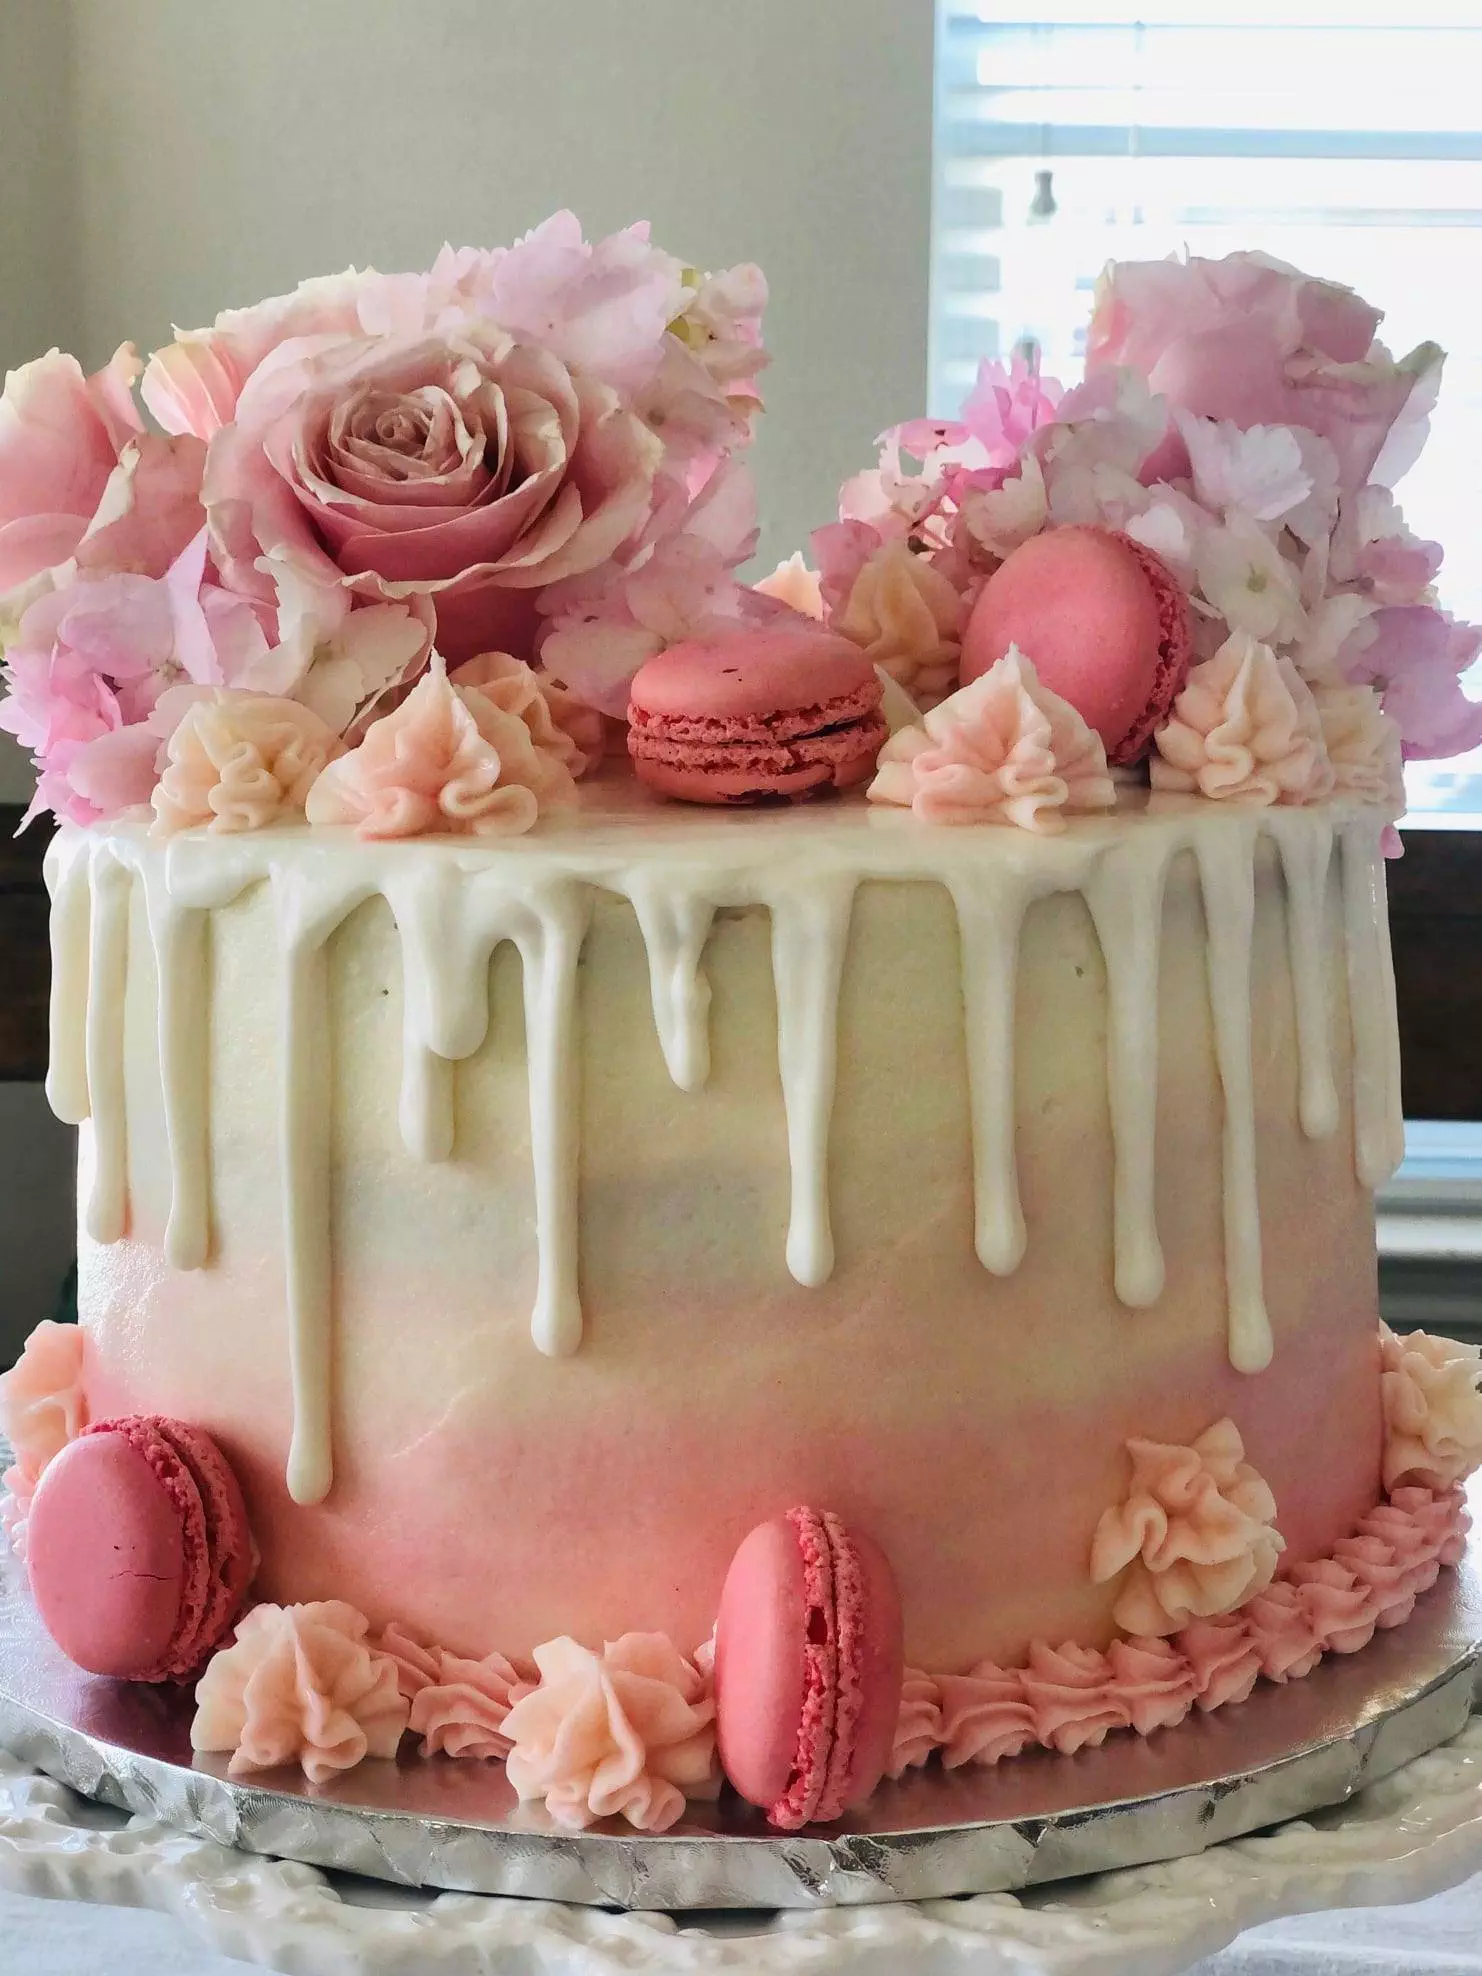 3 Tier Dusty Pink And White Wedding Cake | Baked by Nataleen